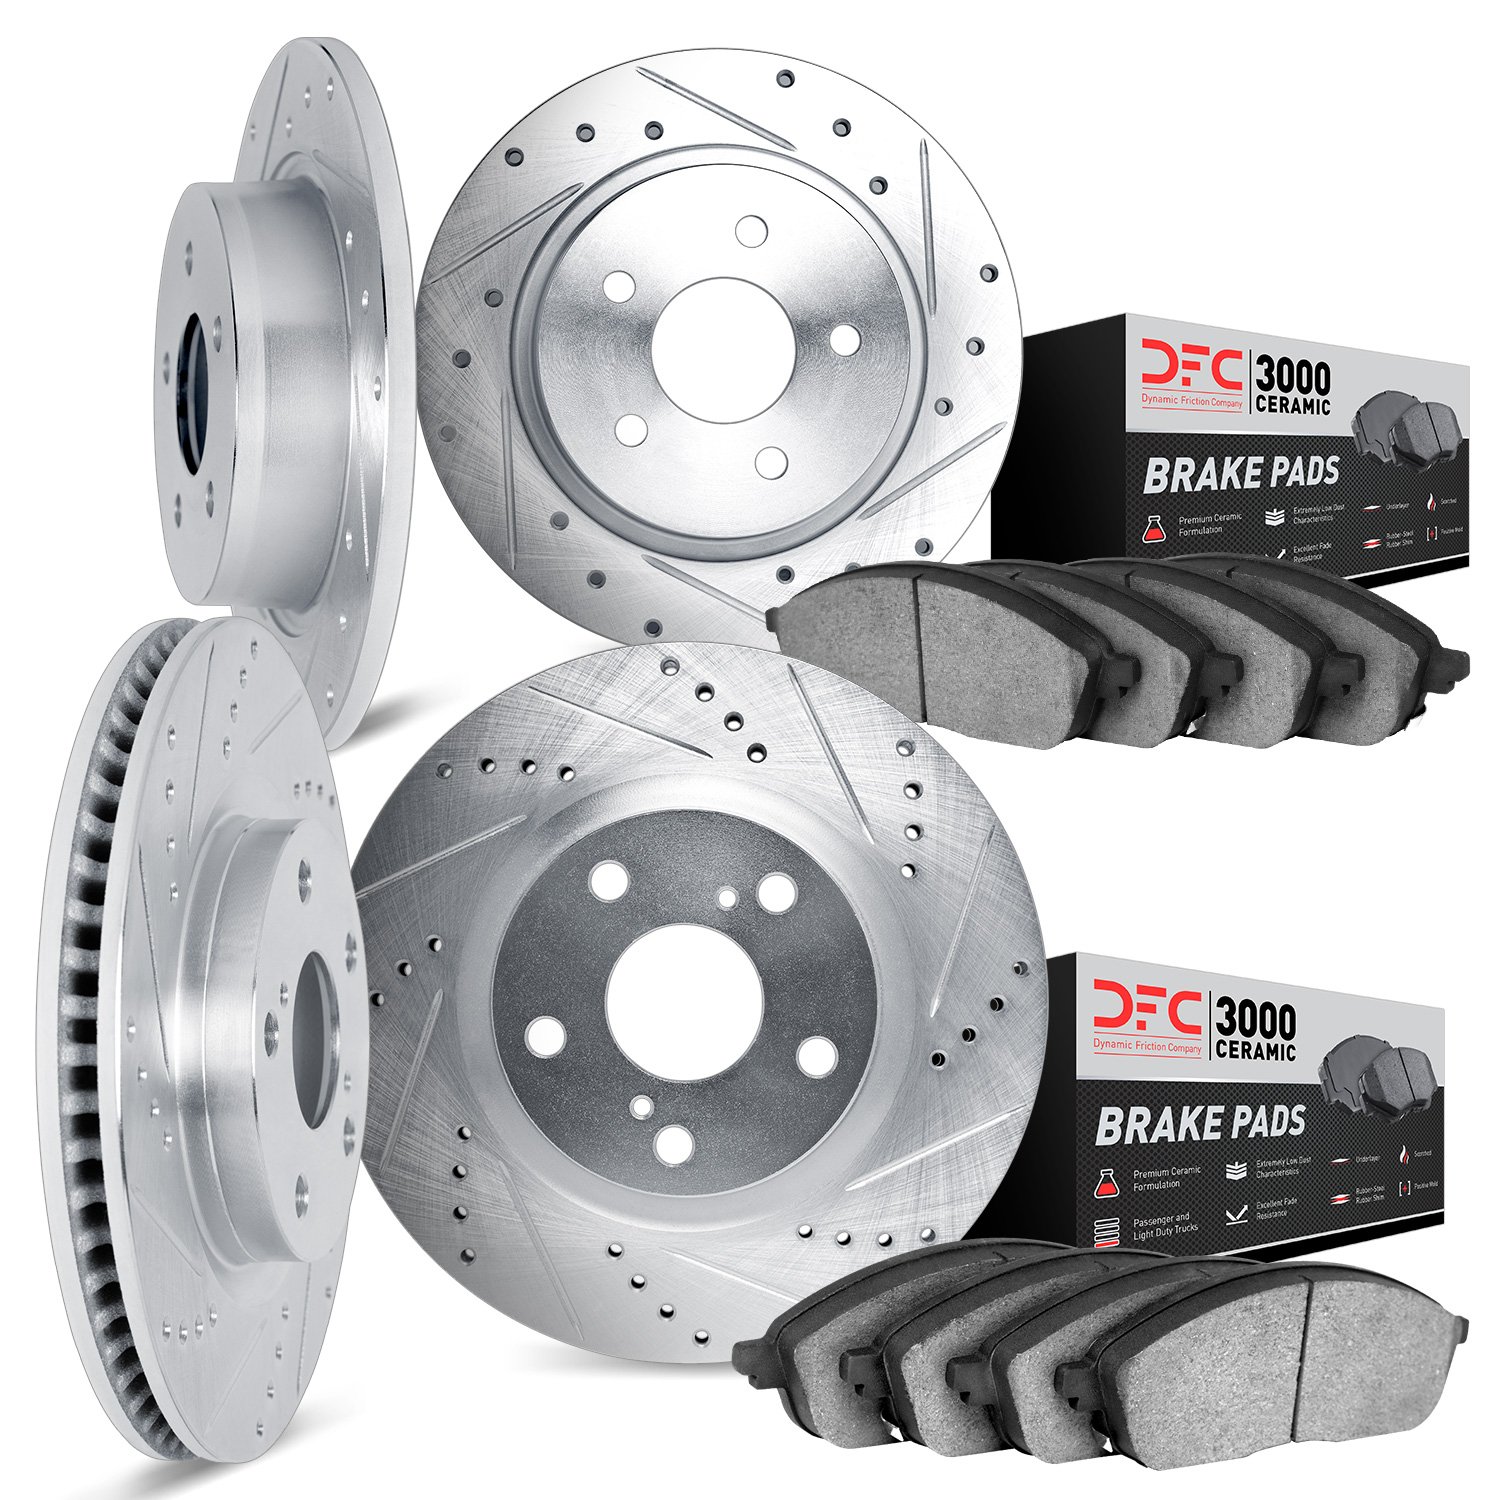 7304-75007 Drilled/Slotted Brake Rotor with 3000-Series Ceramic Brake Pads Kit [Silver], 1998-2010 Lexus/Toyota/Scion, Position: